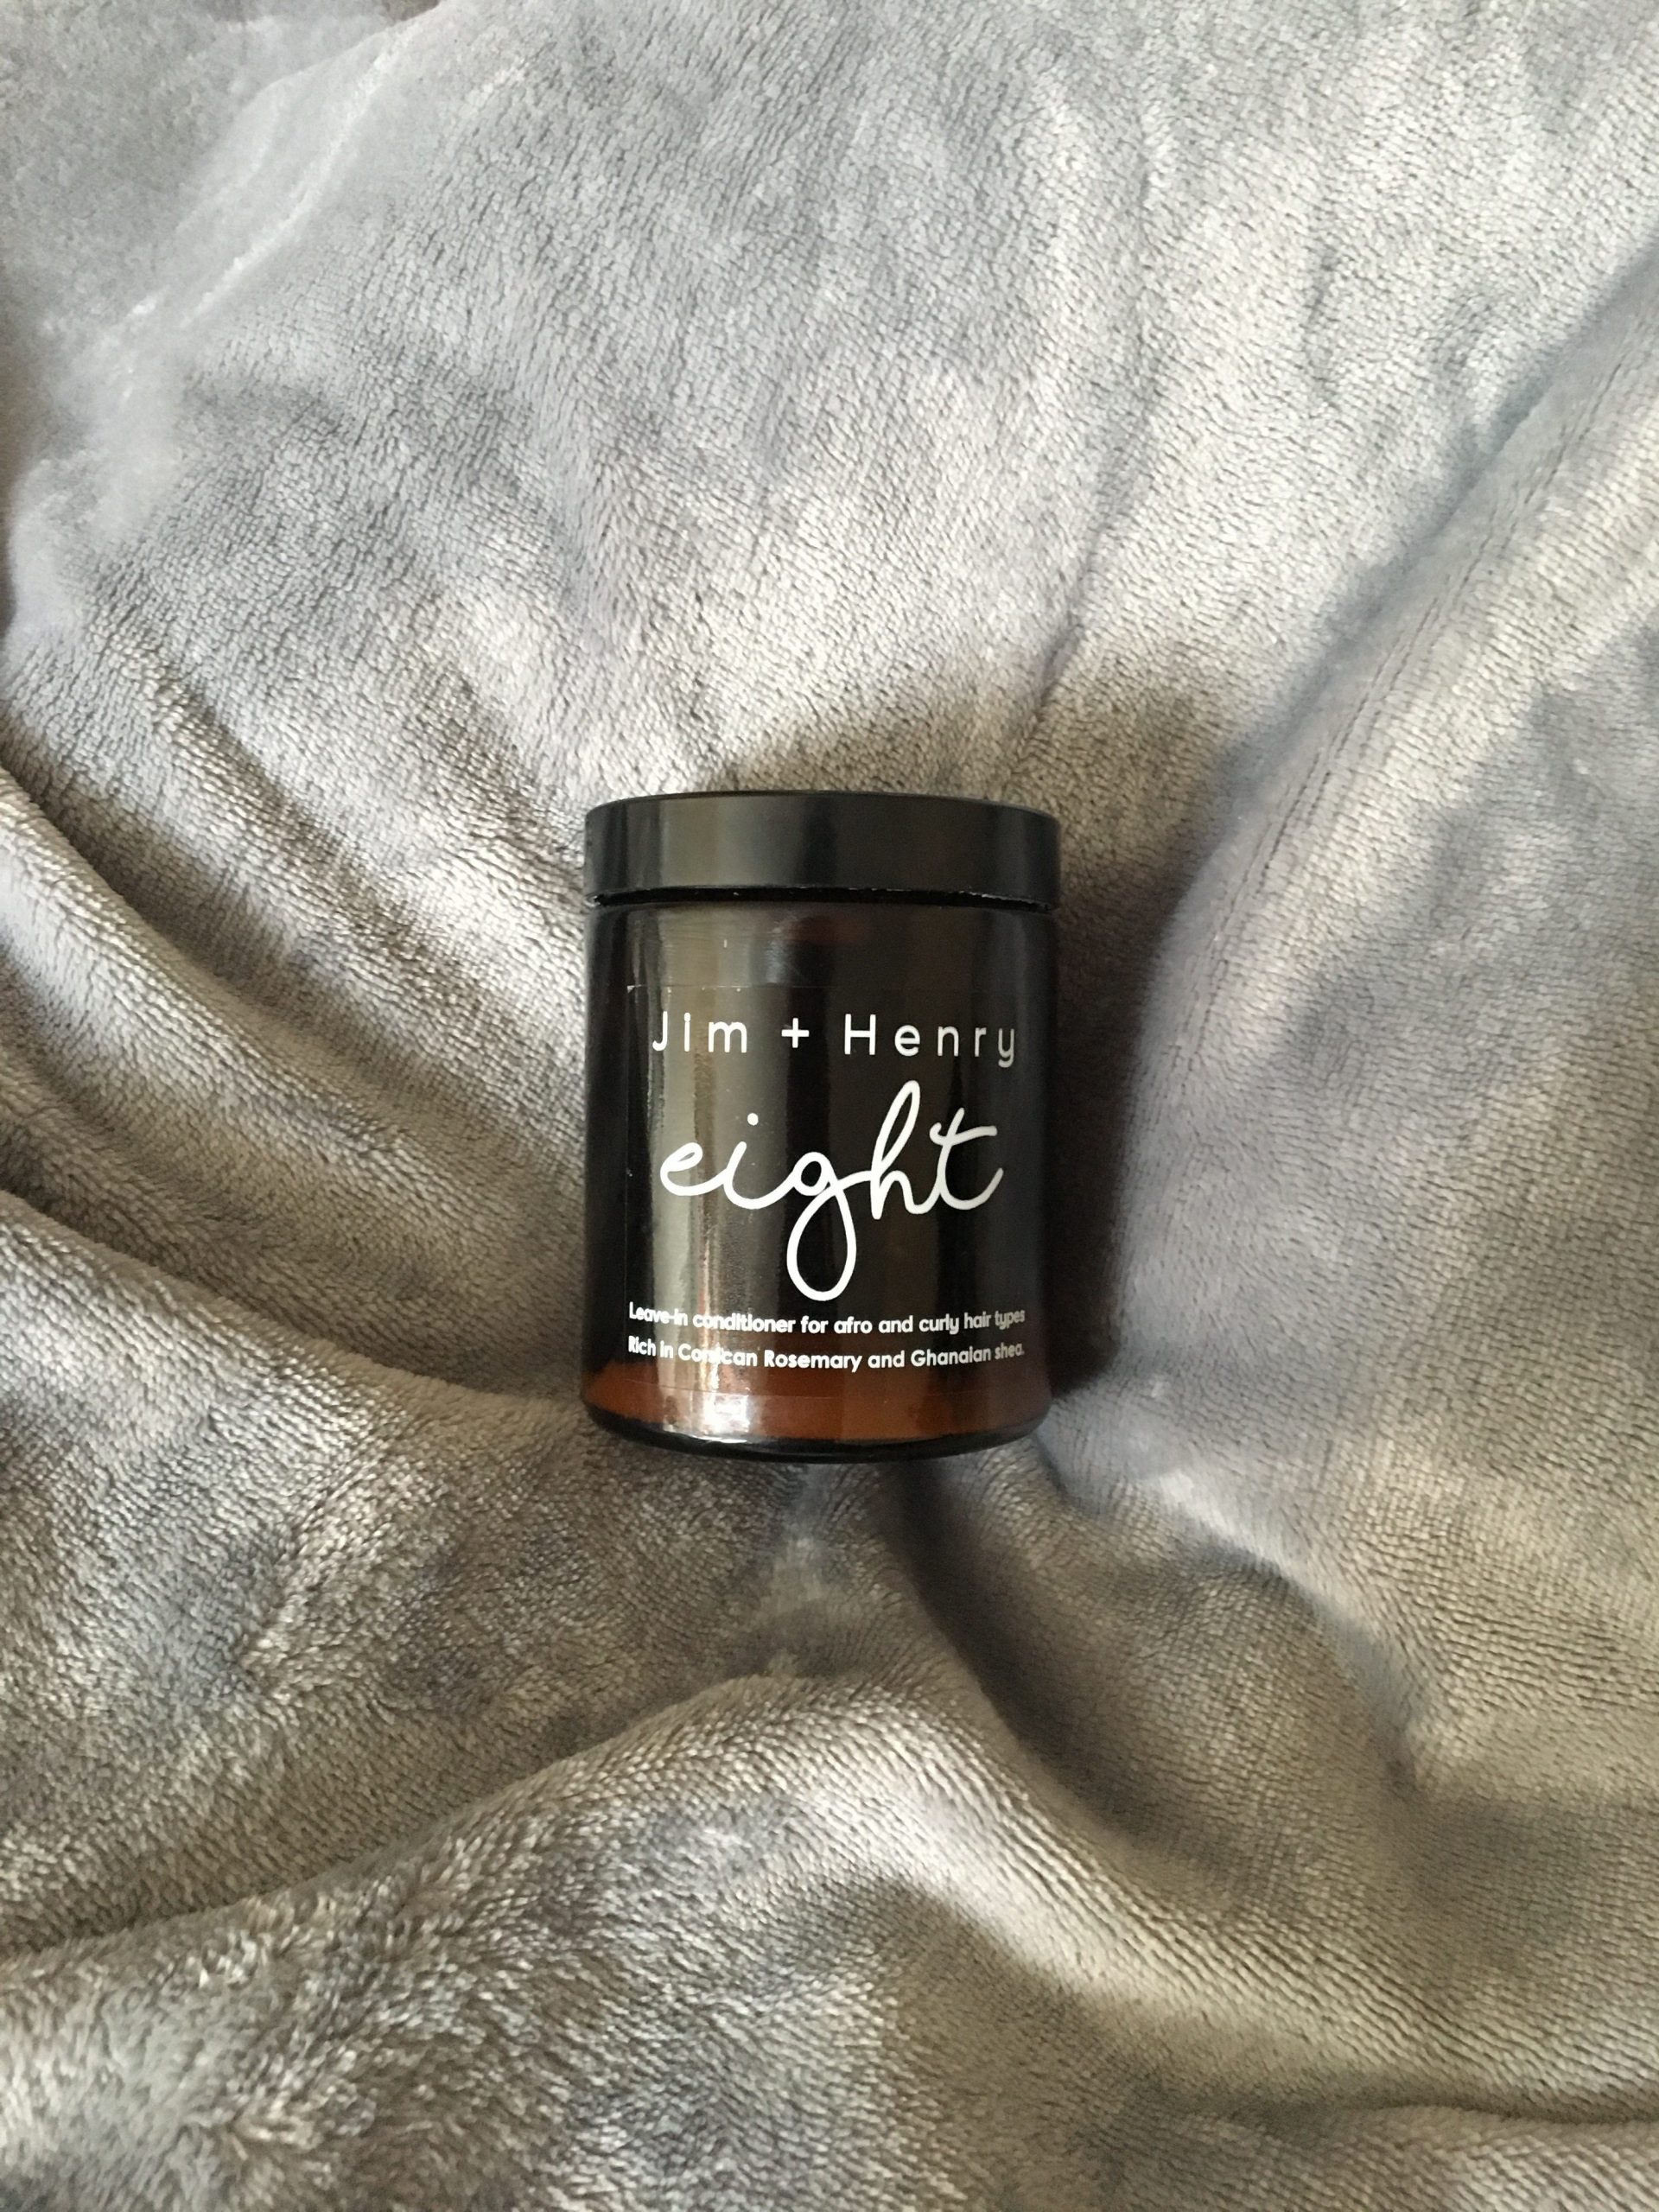 Penny Fro Real product review of Jim + Henry’s ‘Eight’ conditioner for Afro and curly hair